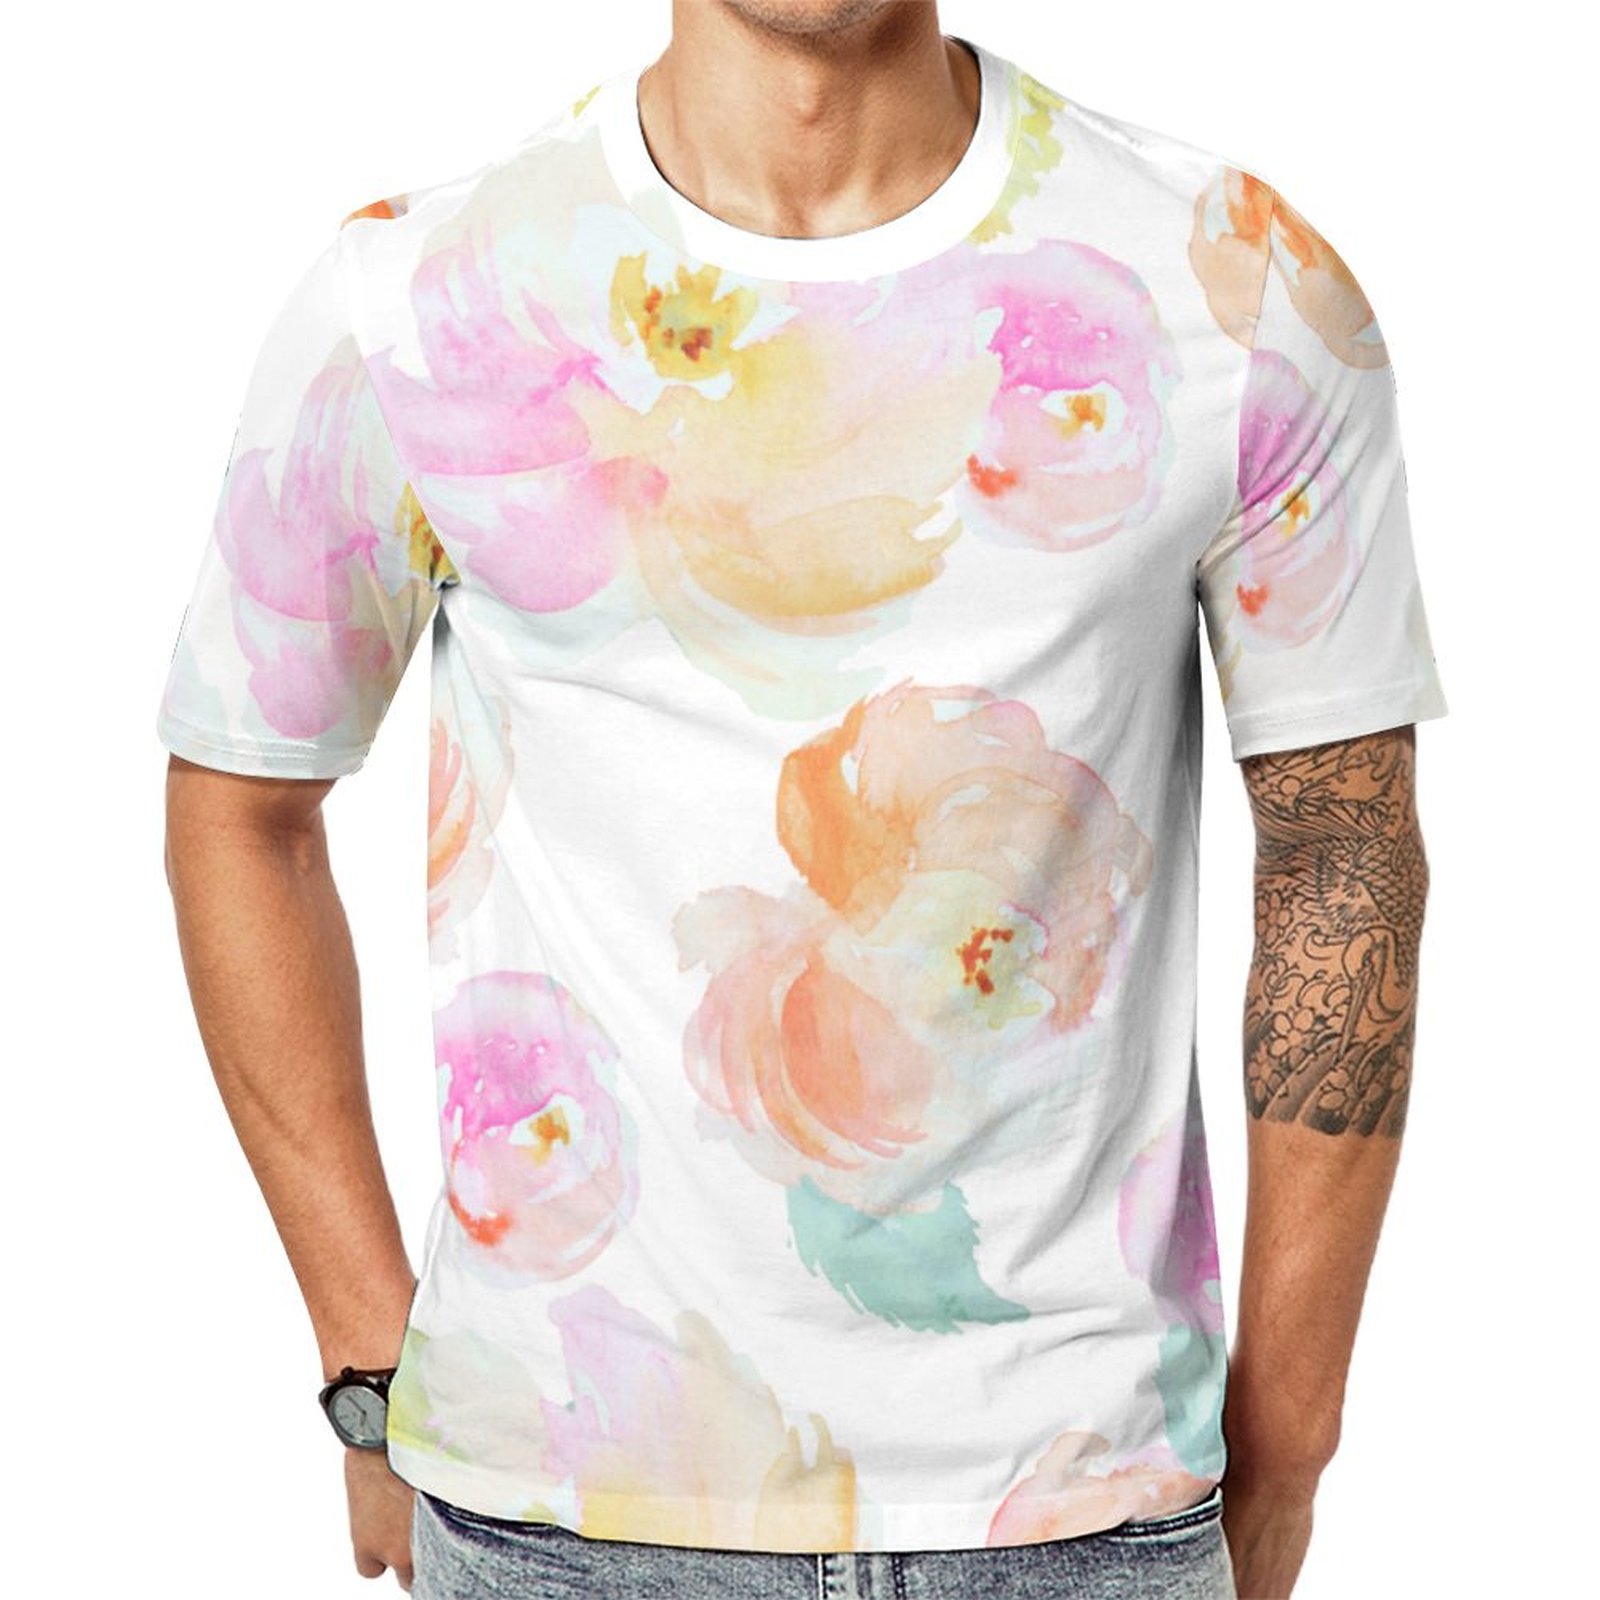 Elegant Pastel Pink Watercolor Floral Short Sleeve Print Unisex Tshirt Summer Casual Tees for Men and Women Coolcoshirts